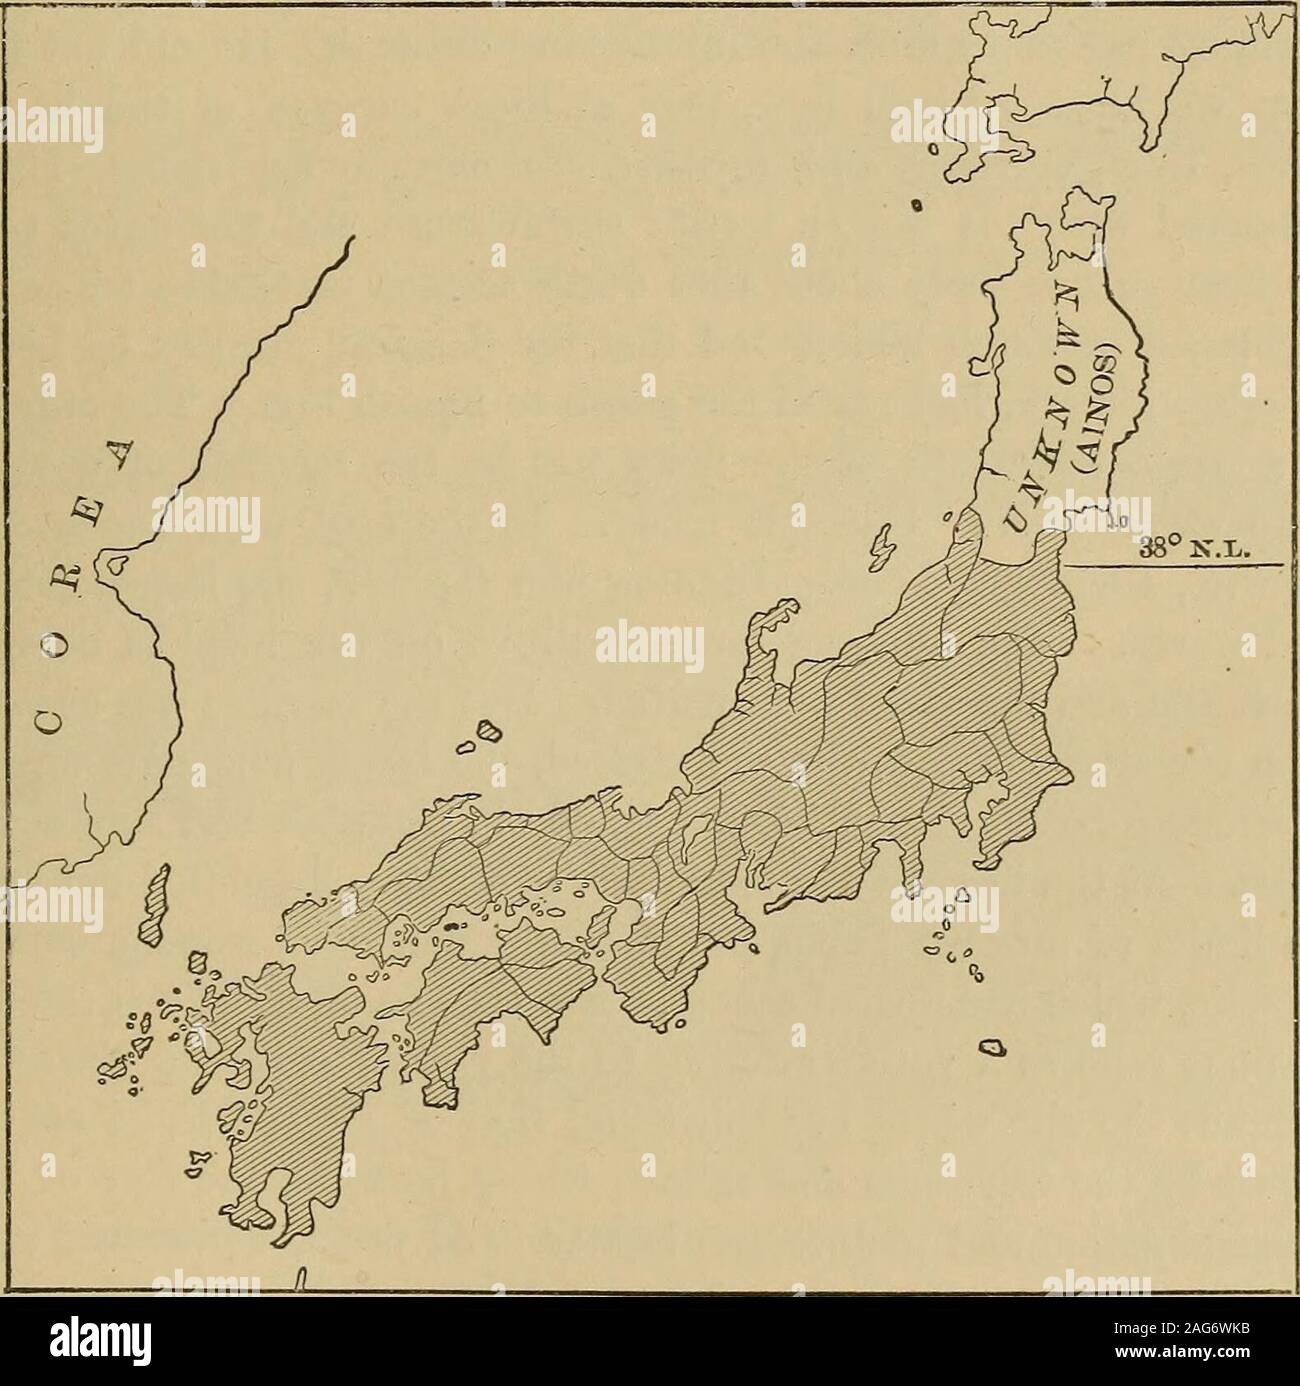 The mikado's empire. ces were called Kuan-sei (west of the barrier